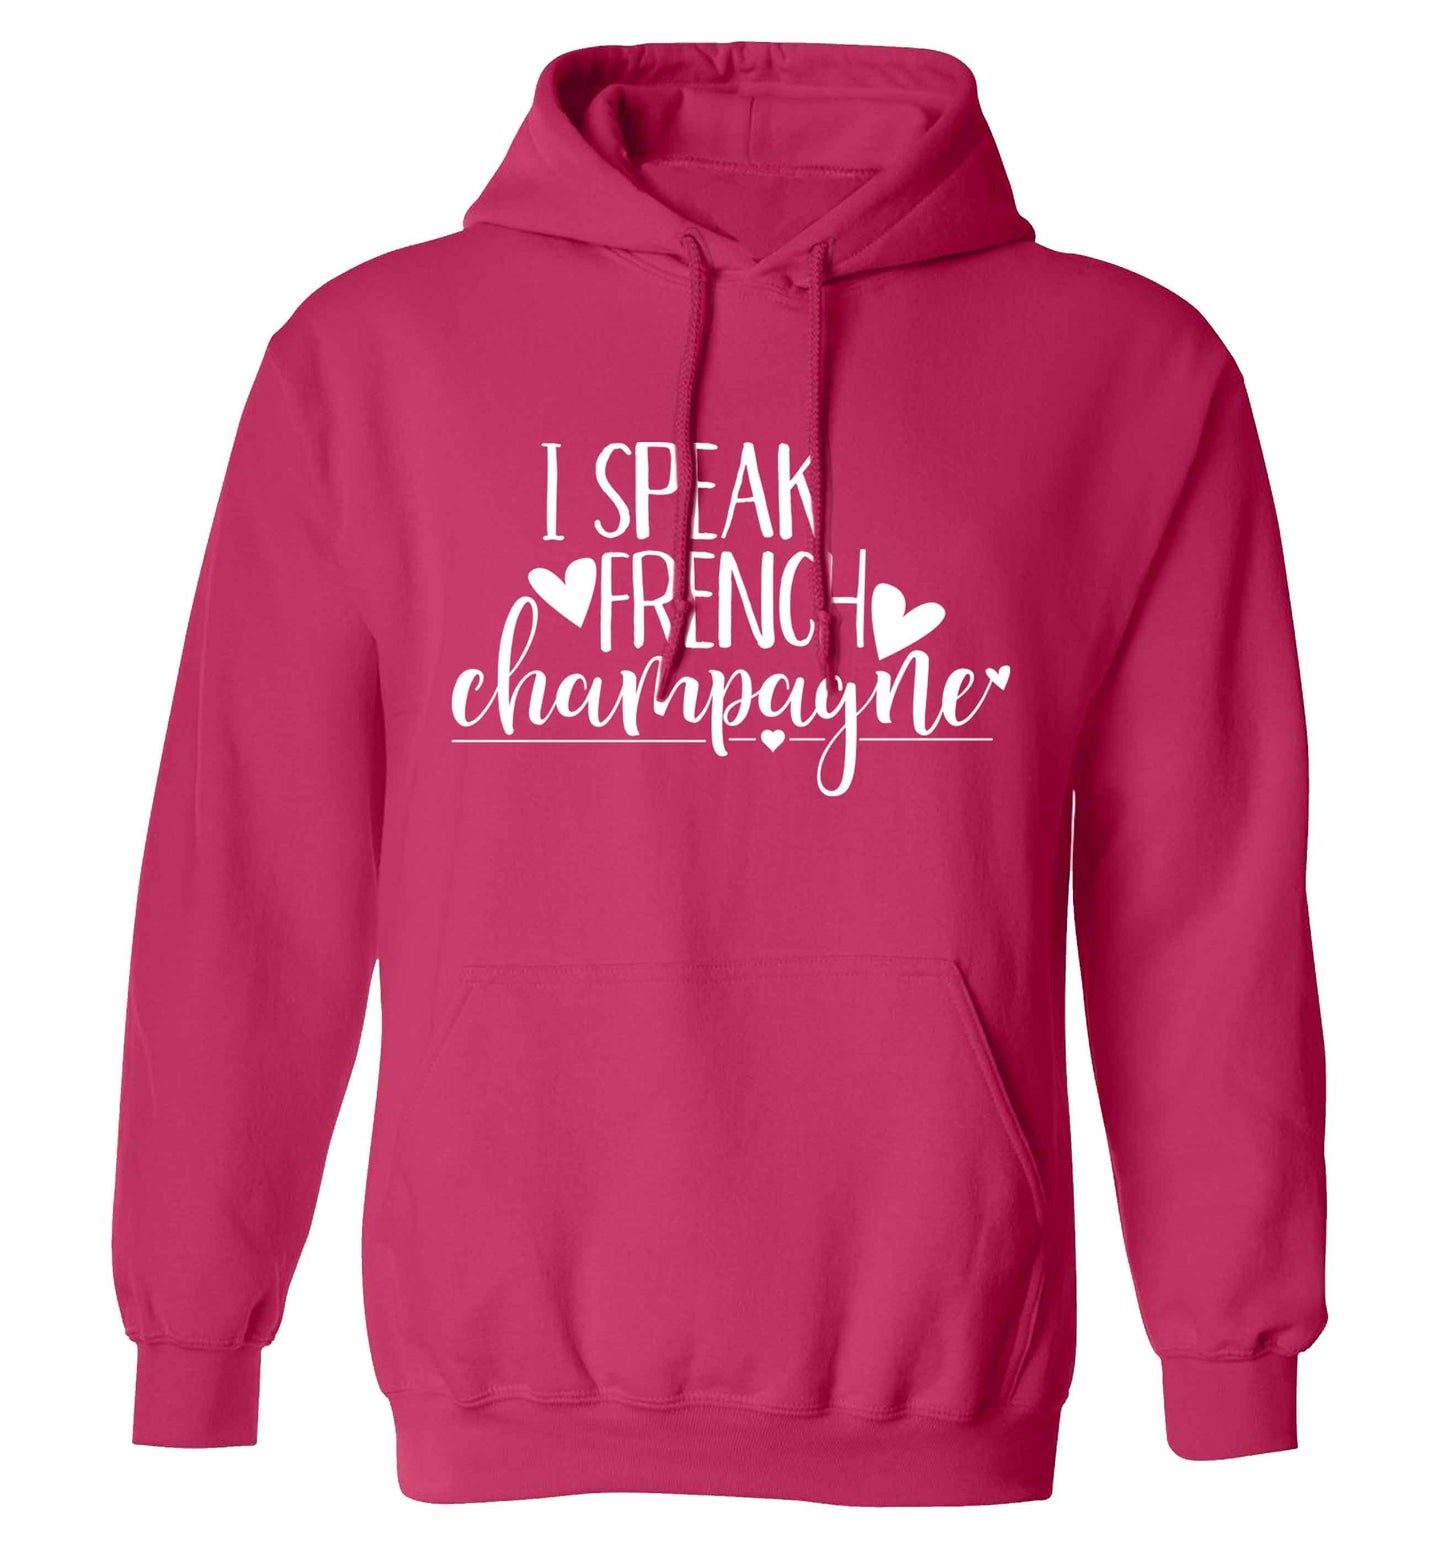 I speak french champagne adults unisex pink hoodie 2XL